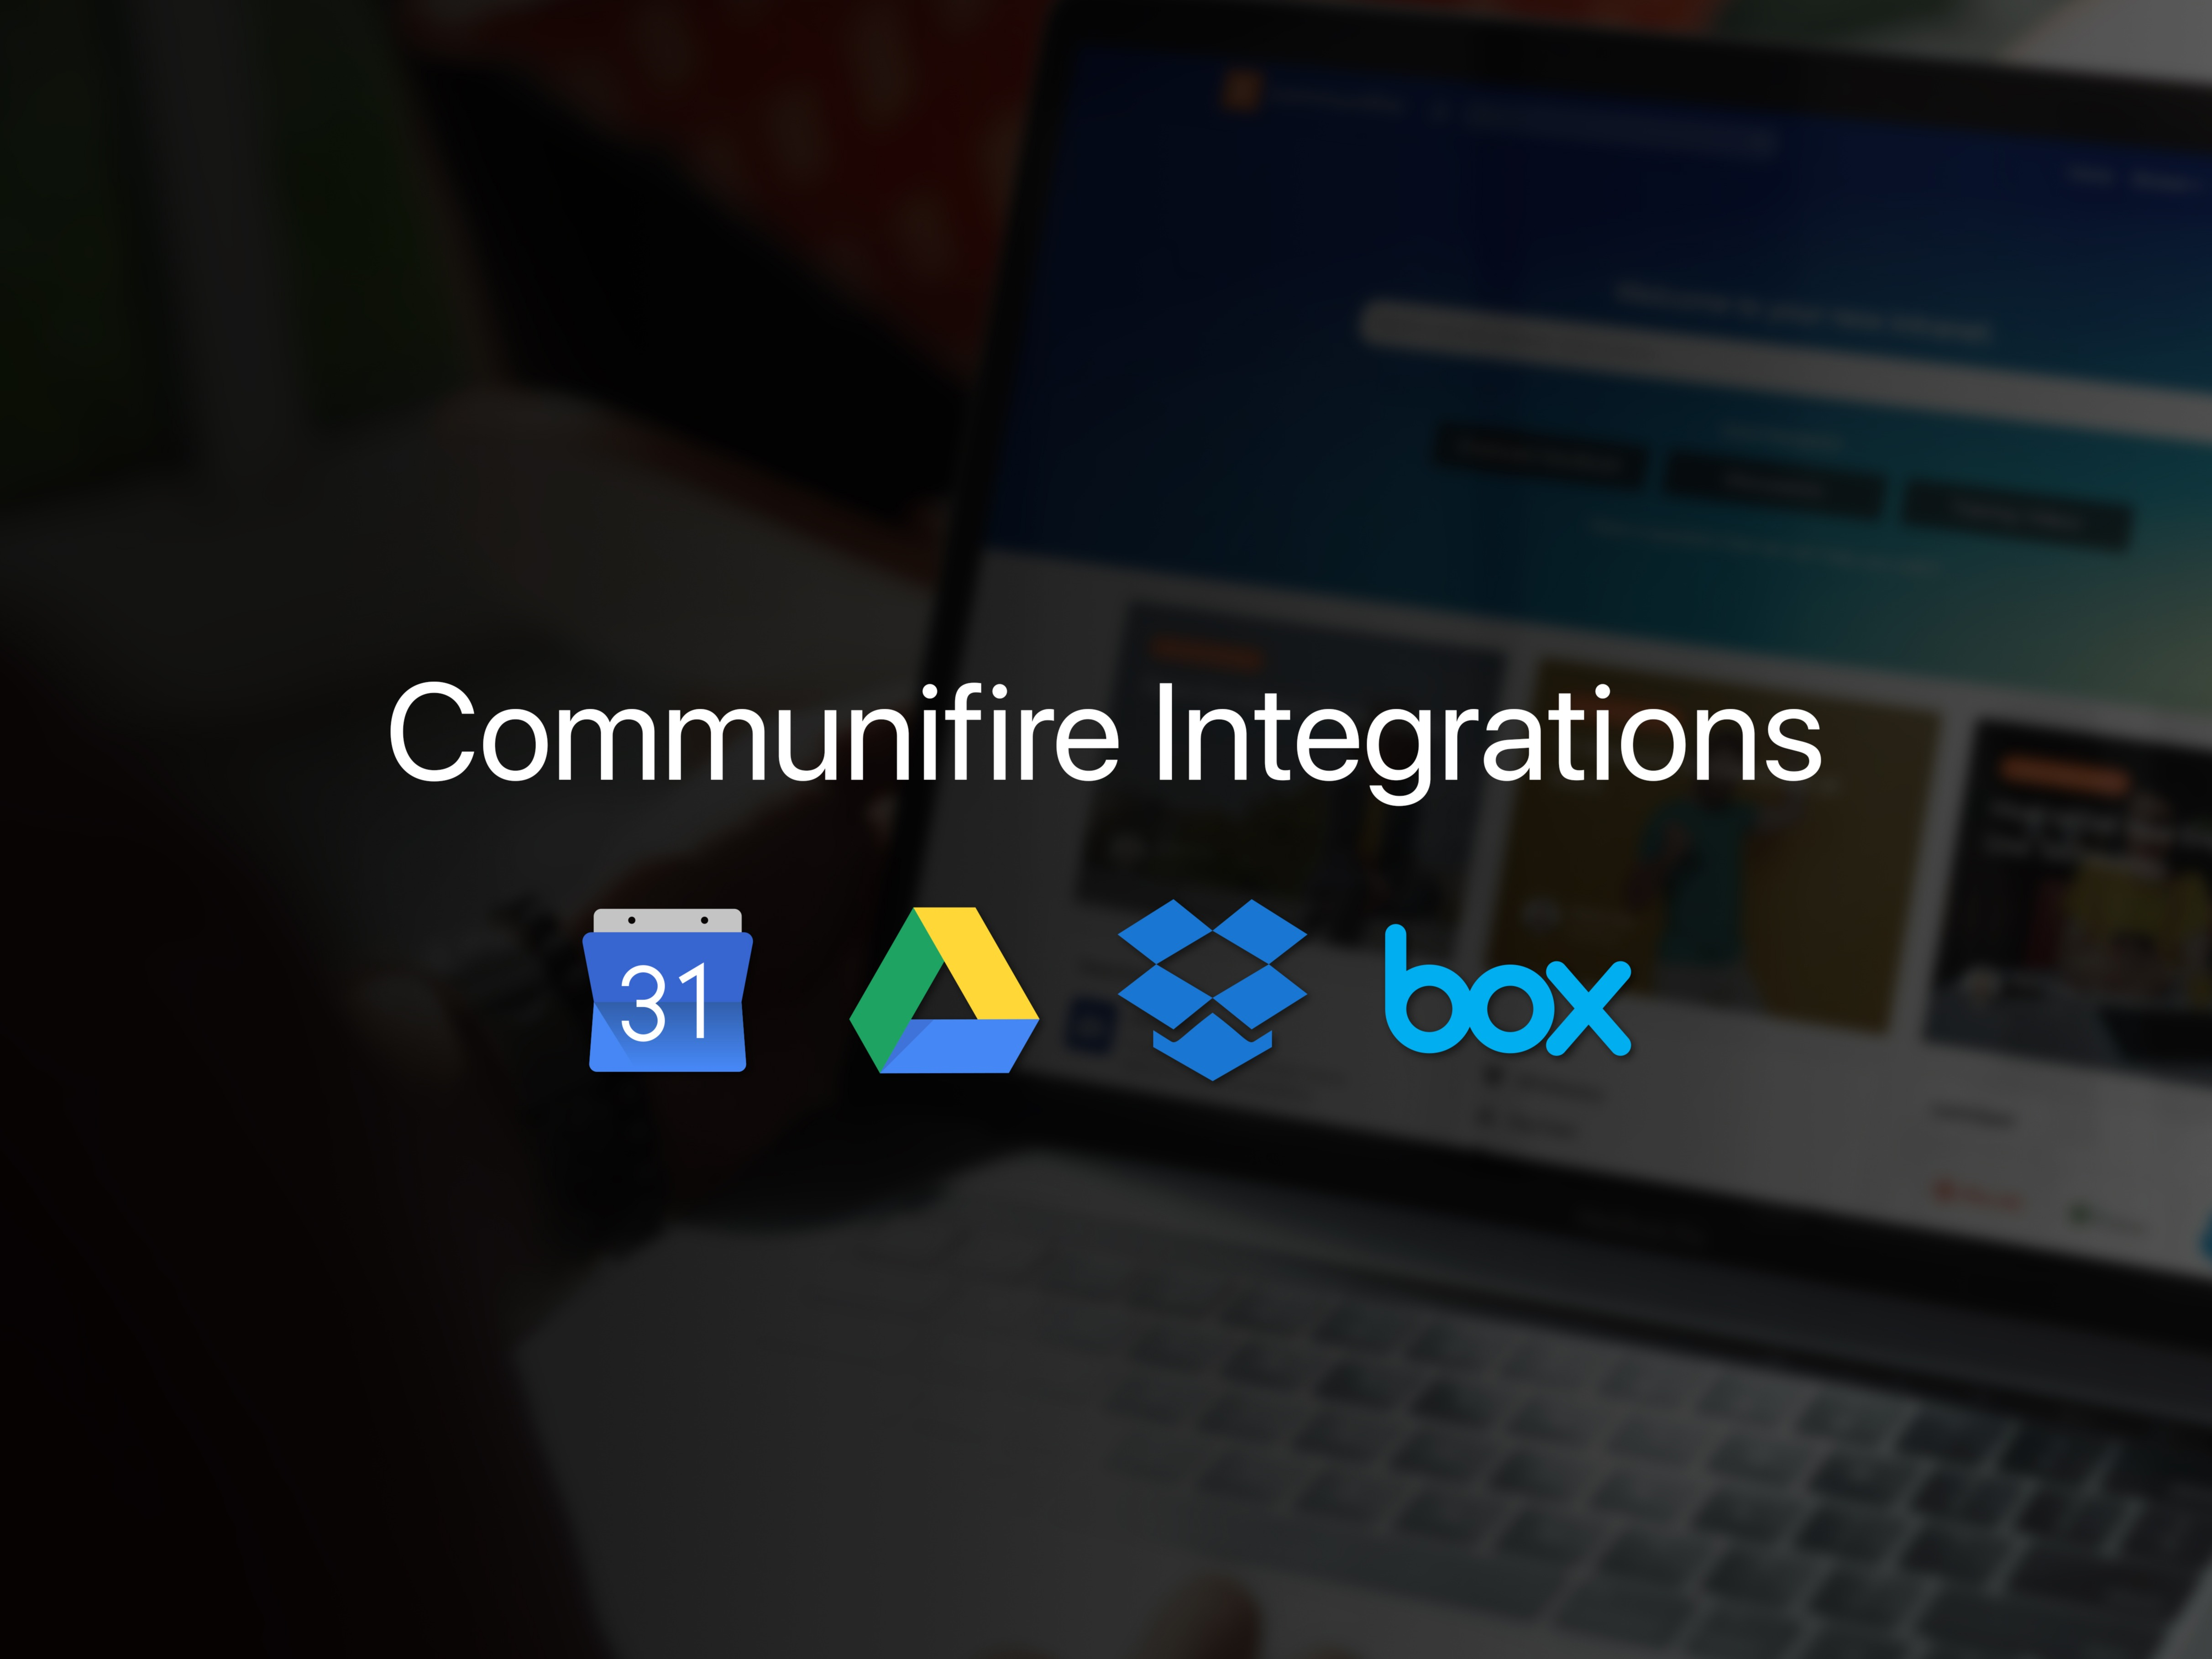 Announcing New Communifire Integrations with Google Calendar, Google Drive, Box, and Dropbox